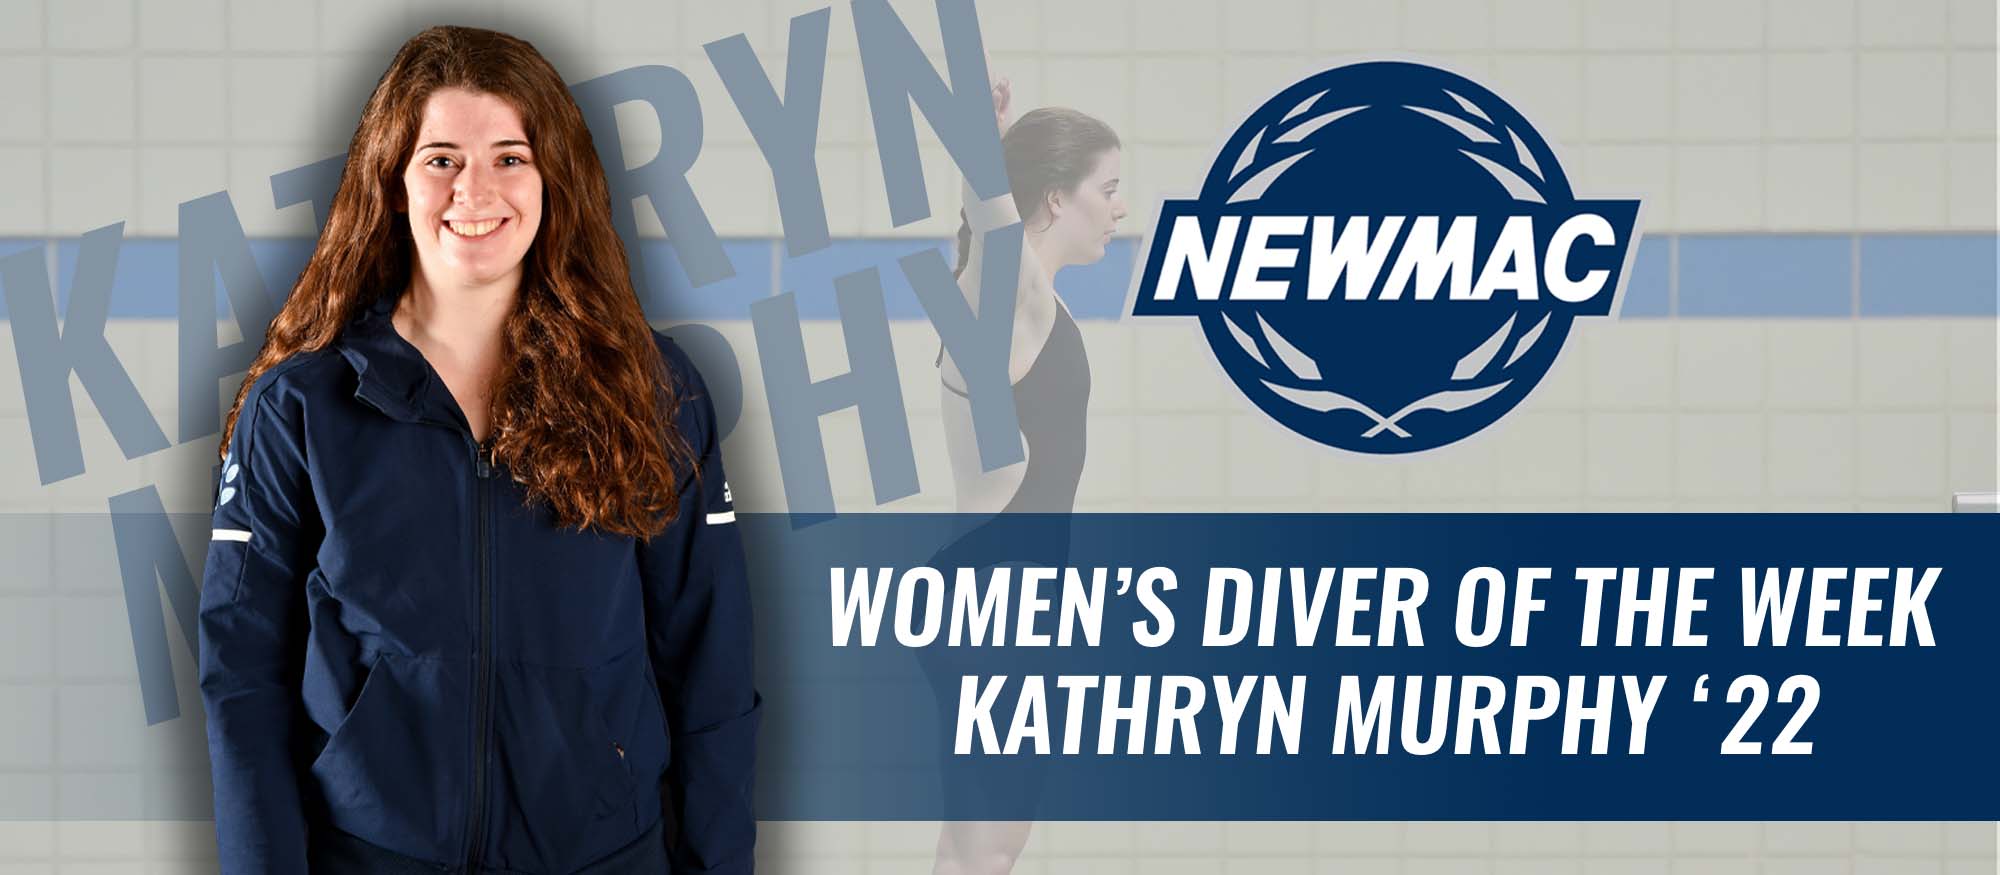 Murphy Collects NEWMAC Women's Diver of the Week Honors for the Second Time